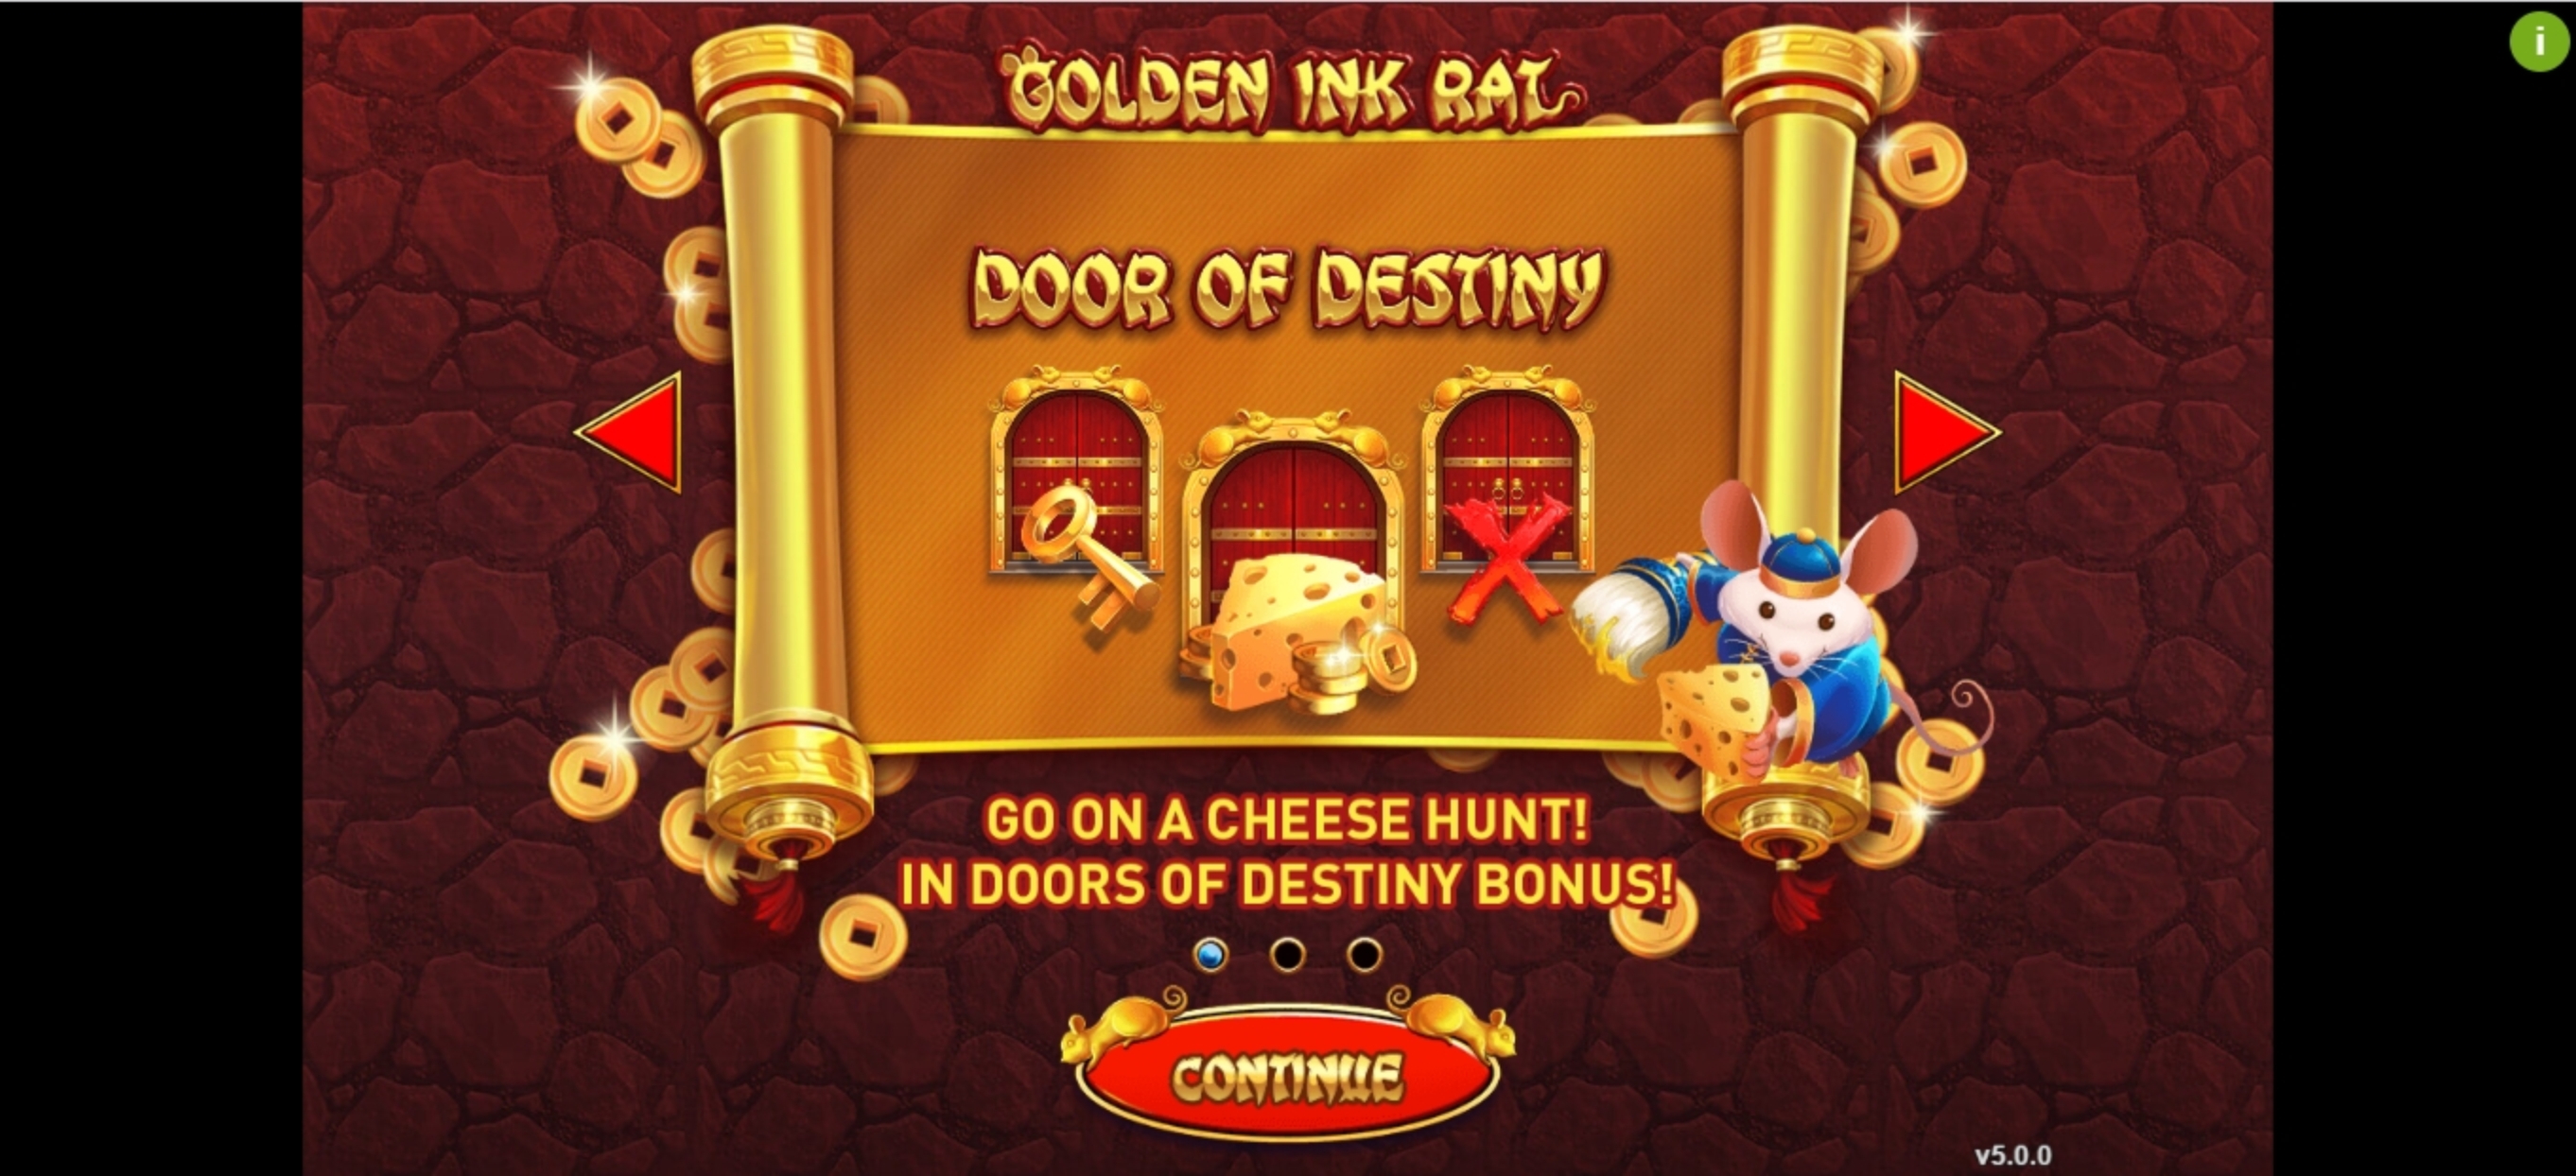 Play Golden Ink Rat Free Casino Slot Game by Gameplay Interactive